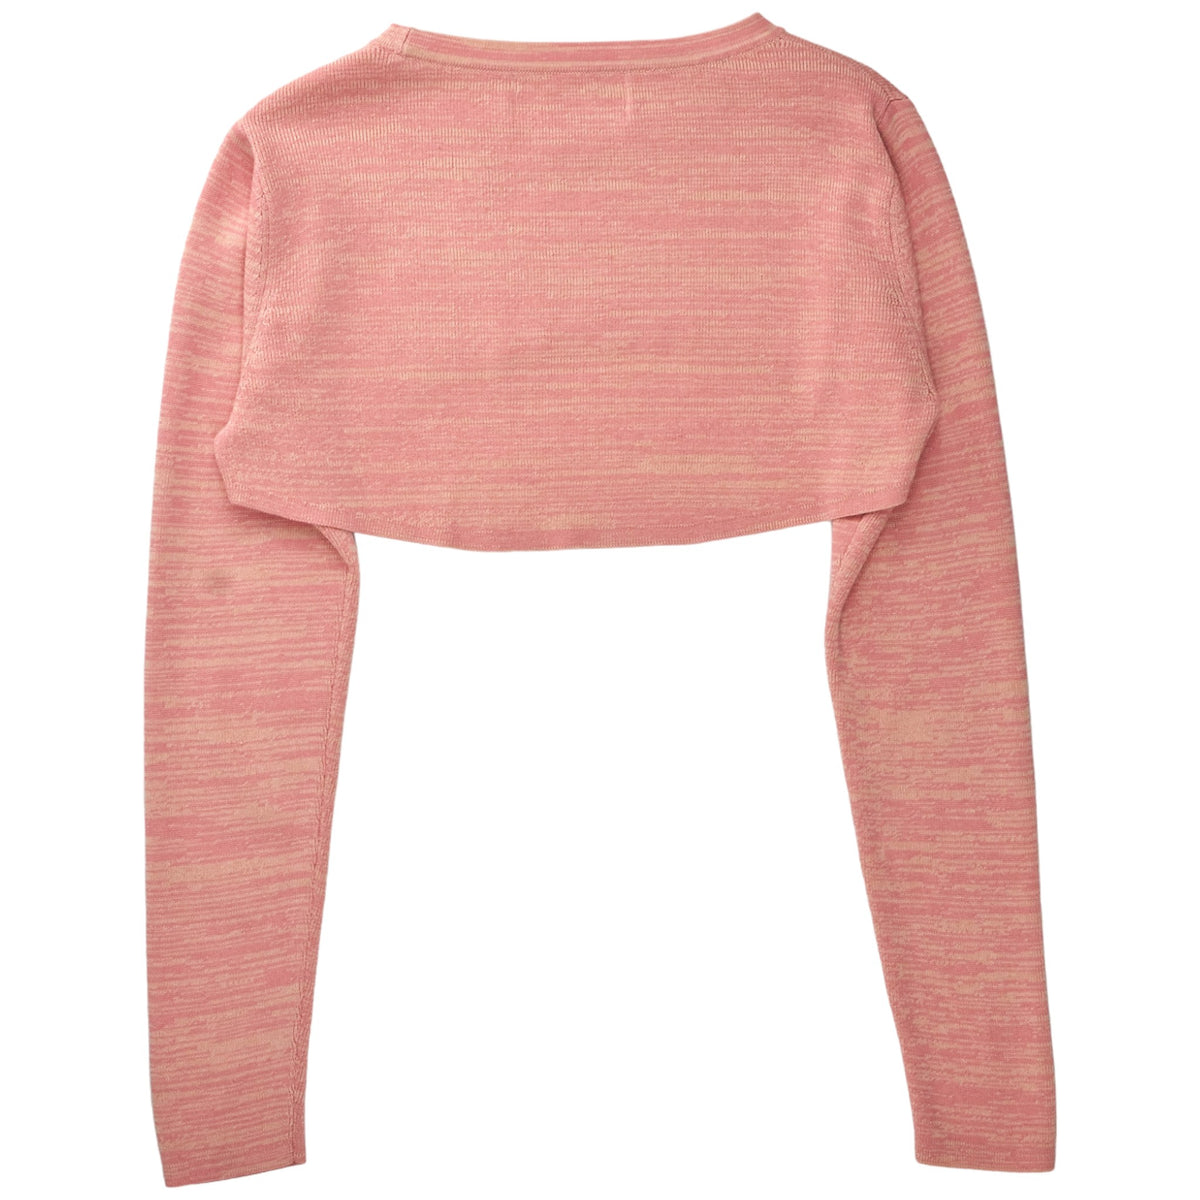 Sunset Lover Pink Marl Knit Top